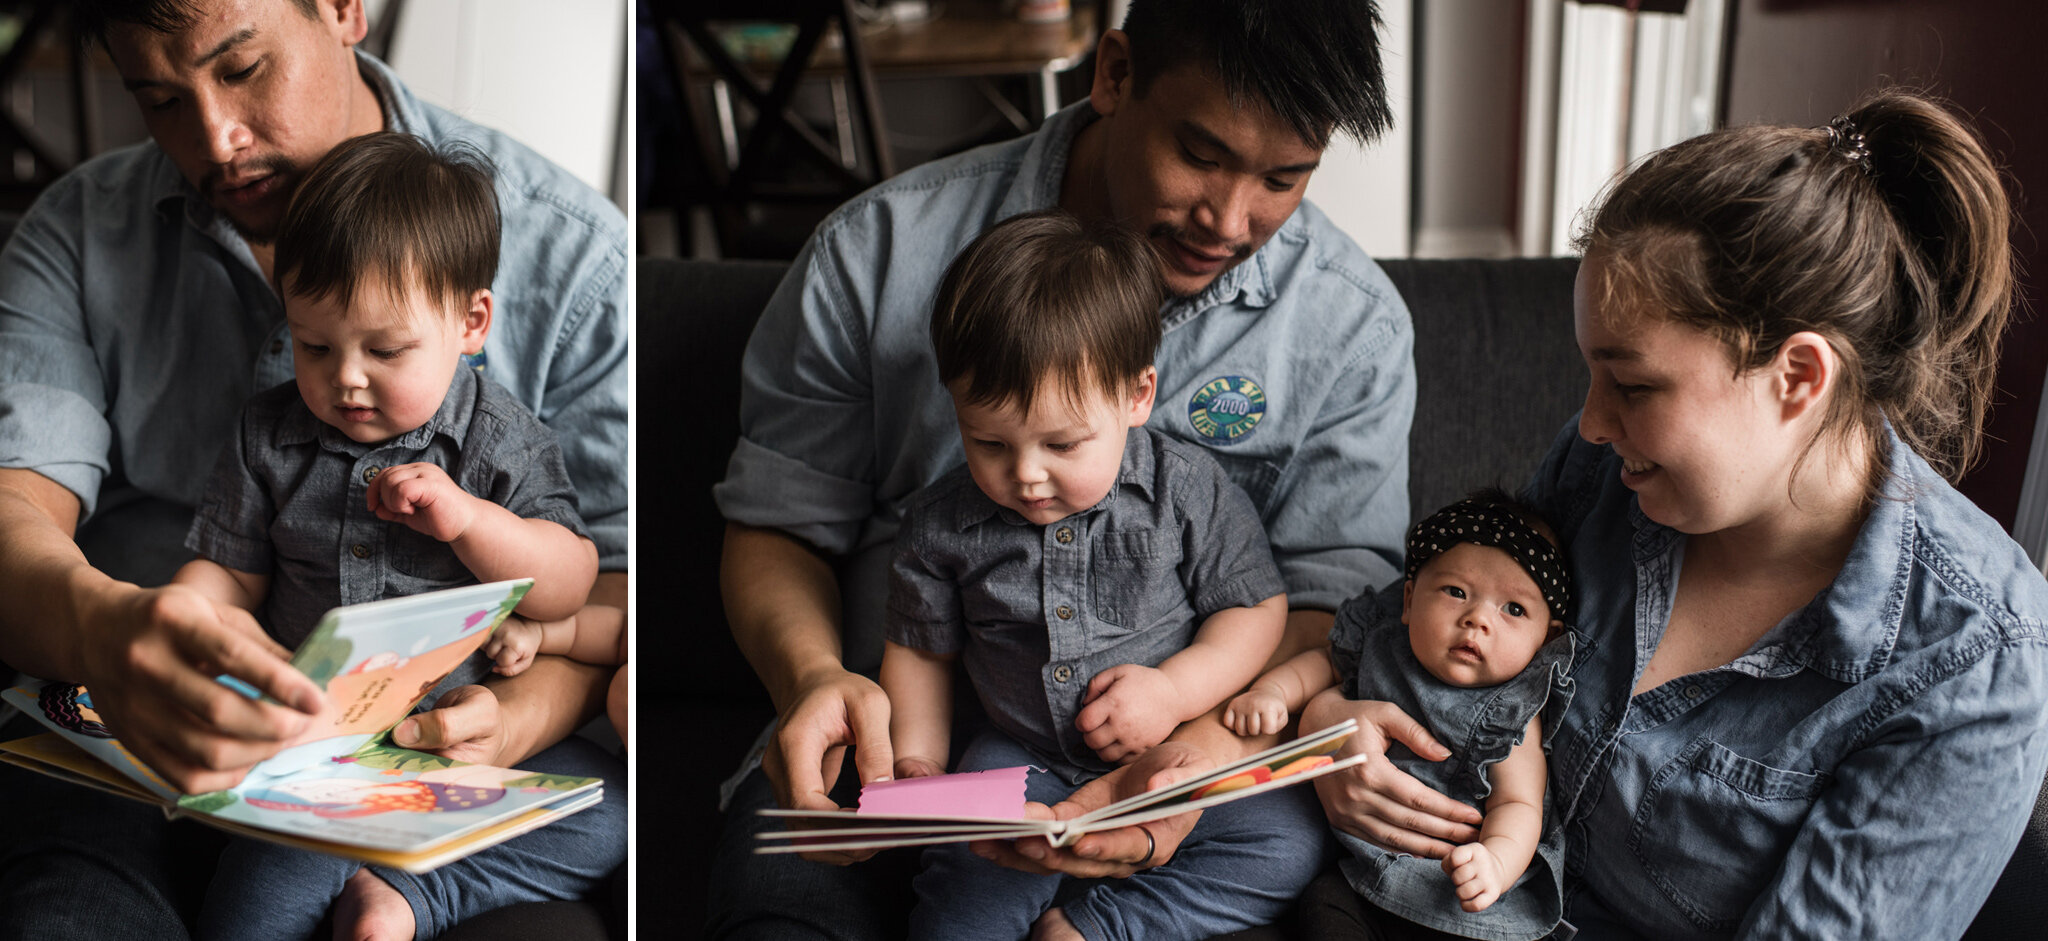 950-new-born-family-session-at-home-toronto-photographer-documentary-session.jpg